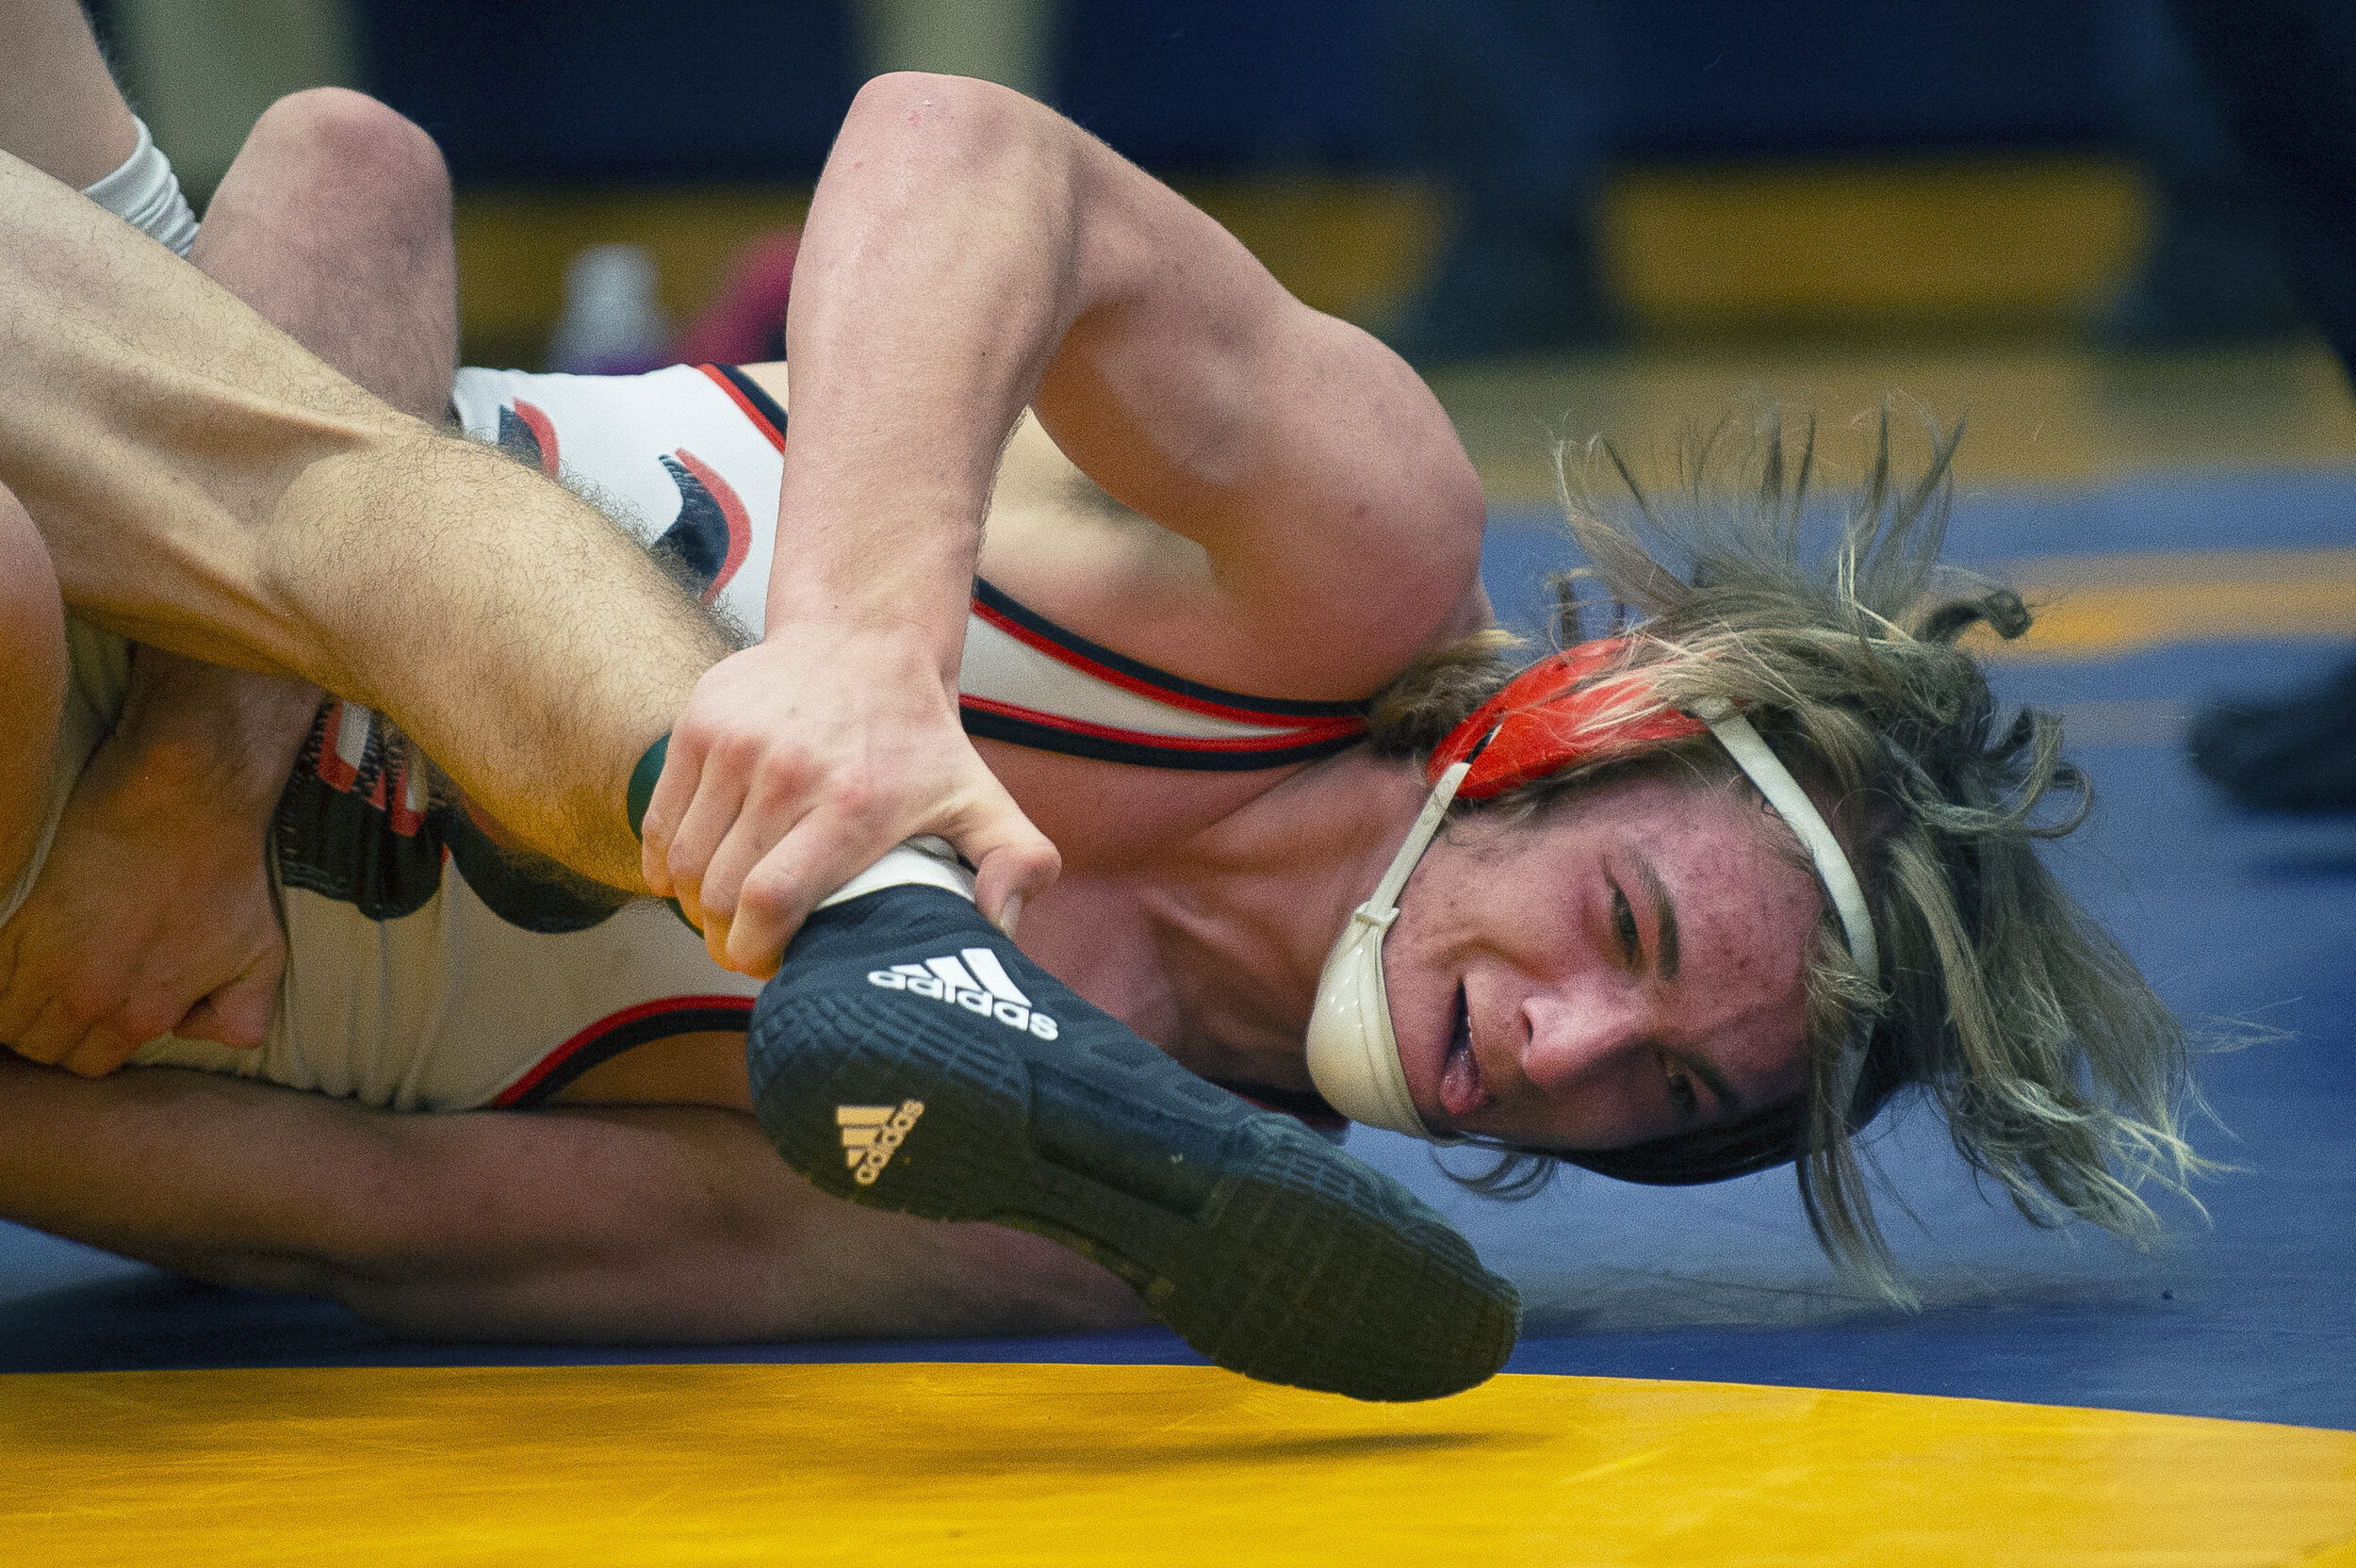  Beatrice's Jarrett Koch reacts as he is twisted into an uncomfortable position by Malcolm's Gavin Zoucha during the Raymond Central Invitational on Saturday, January 30, 2021, at Raymond Central High School. KENNETH FERRIERA, Journal Star. 